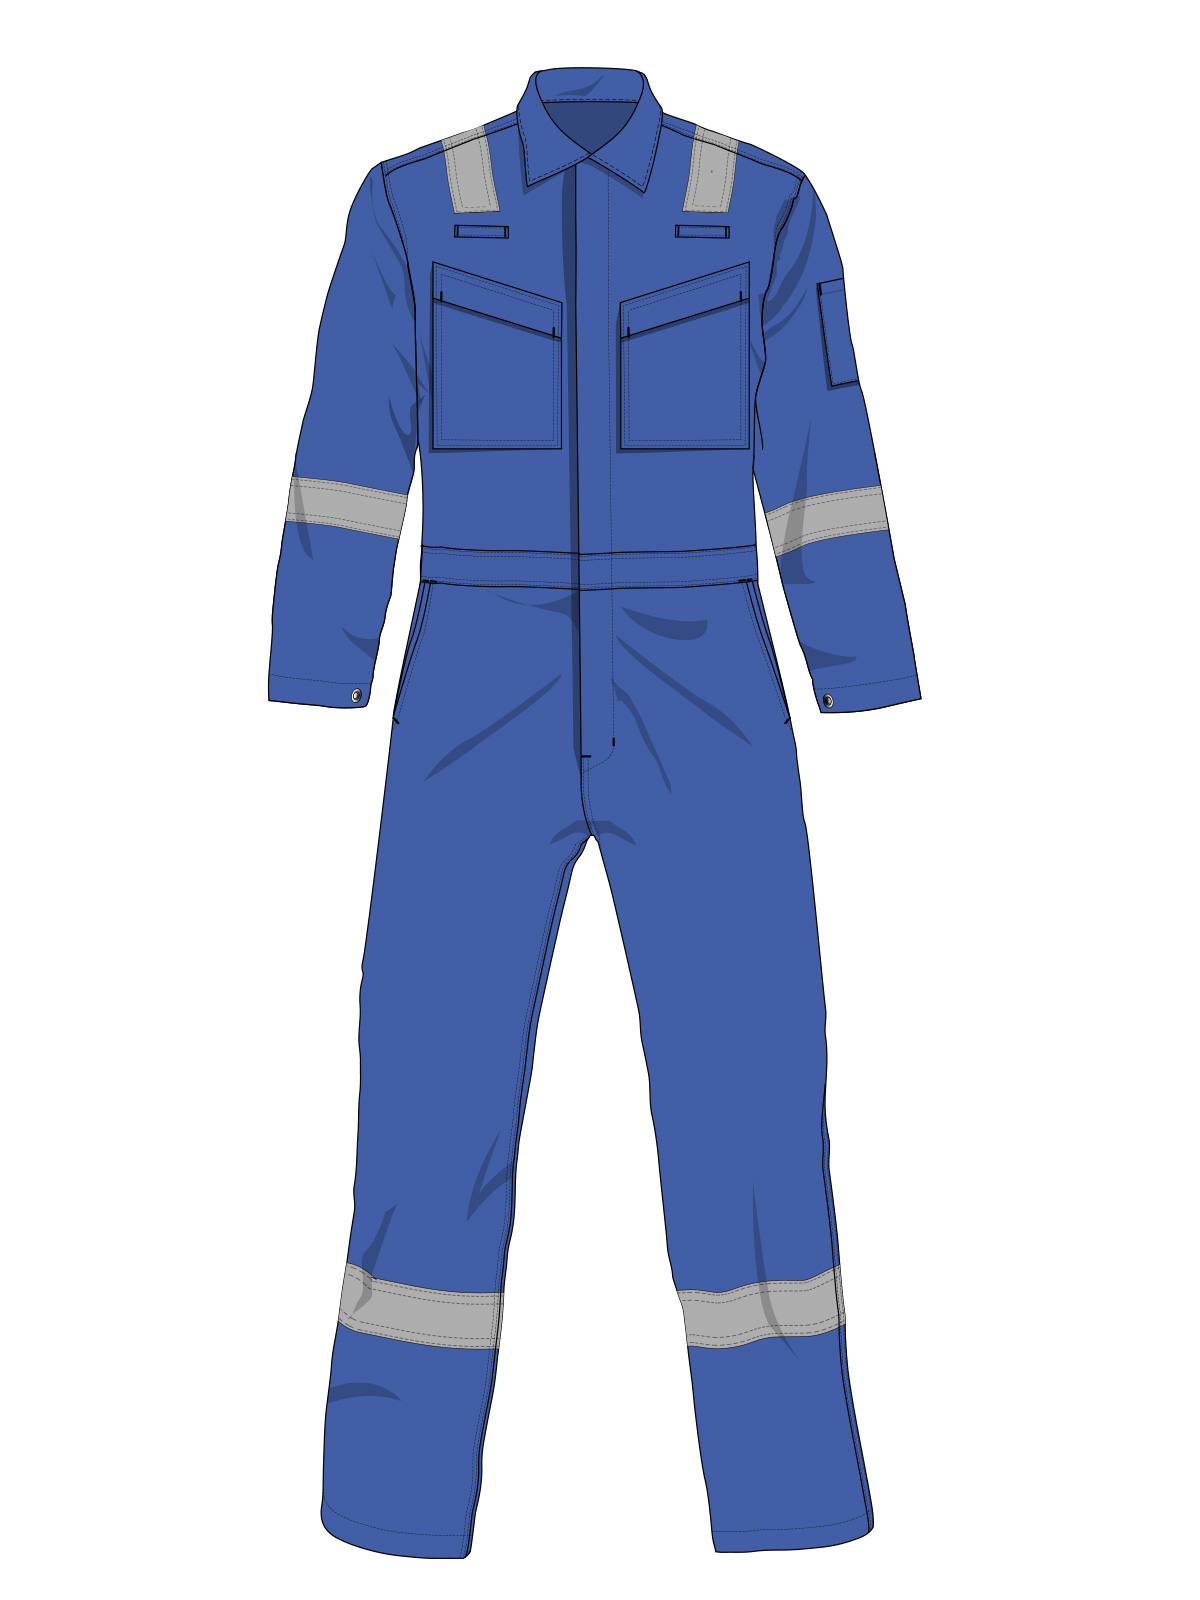 Rigger IFR Fire Retardant Coverall